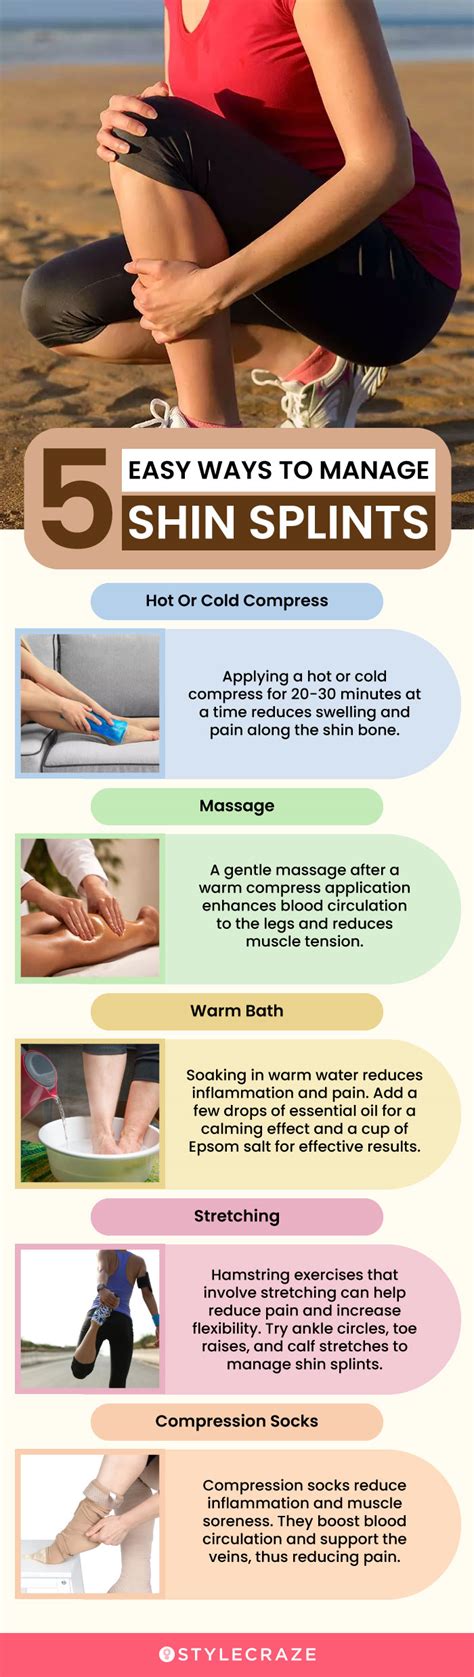 17 Home Remedies For Shin Splints Causes And Prevention